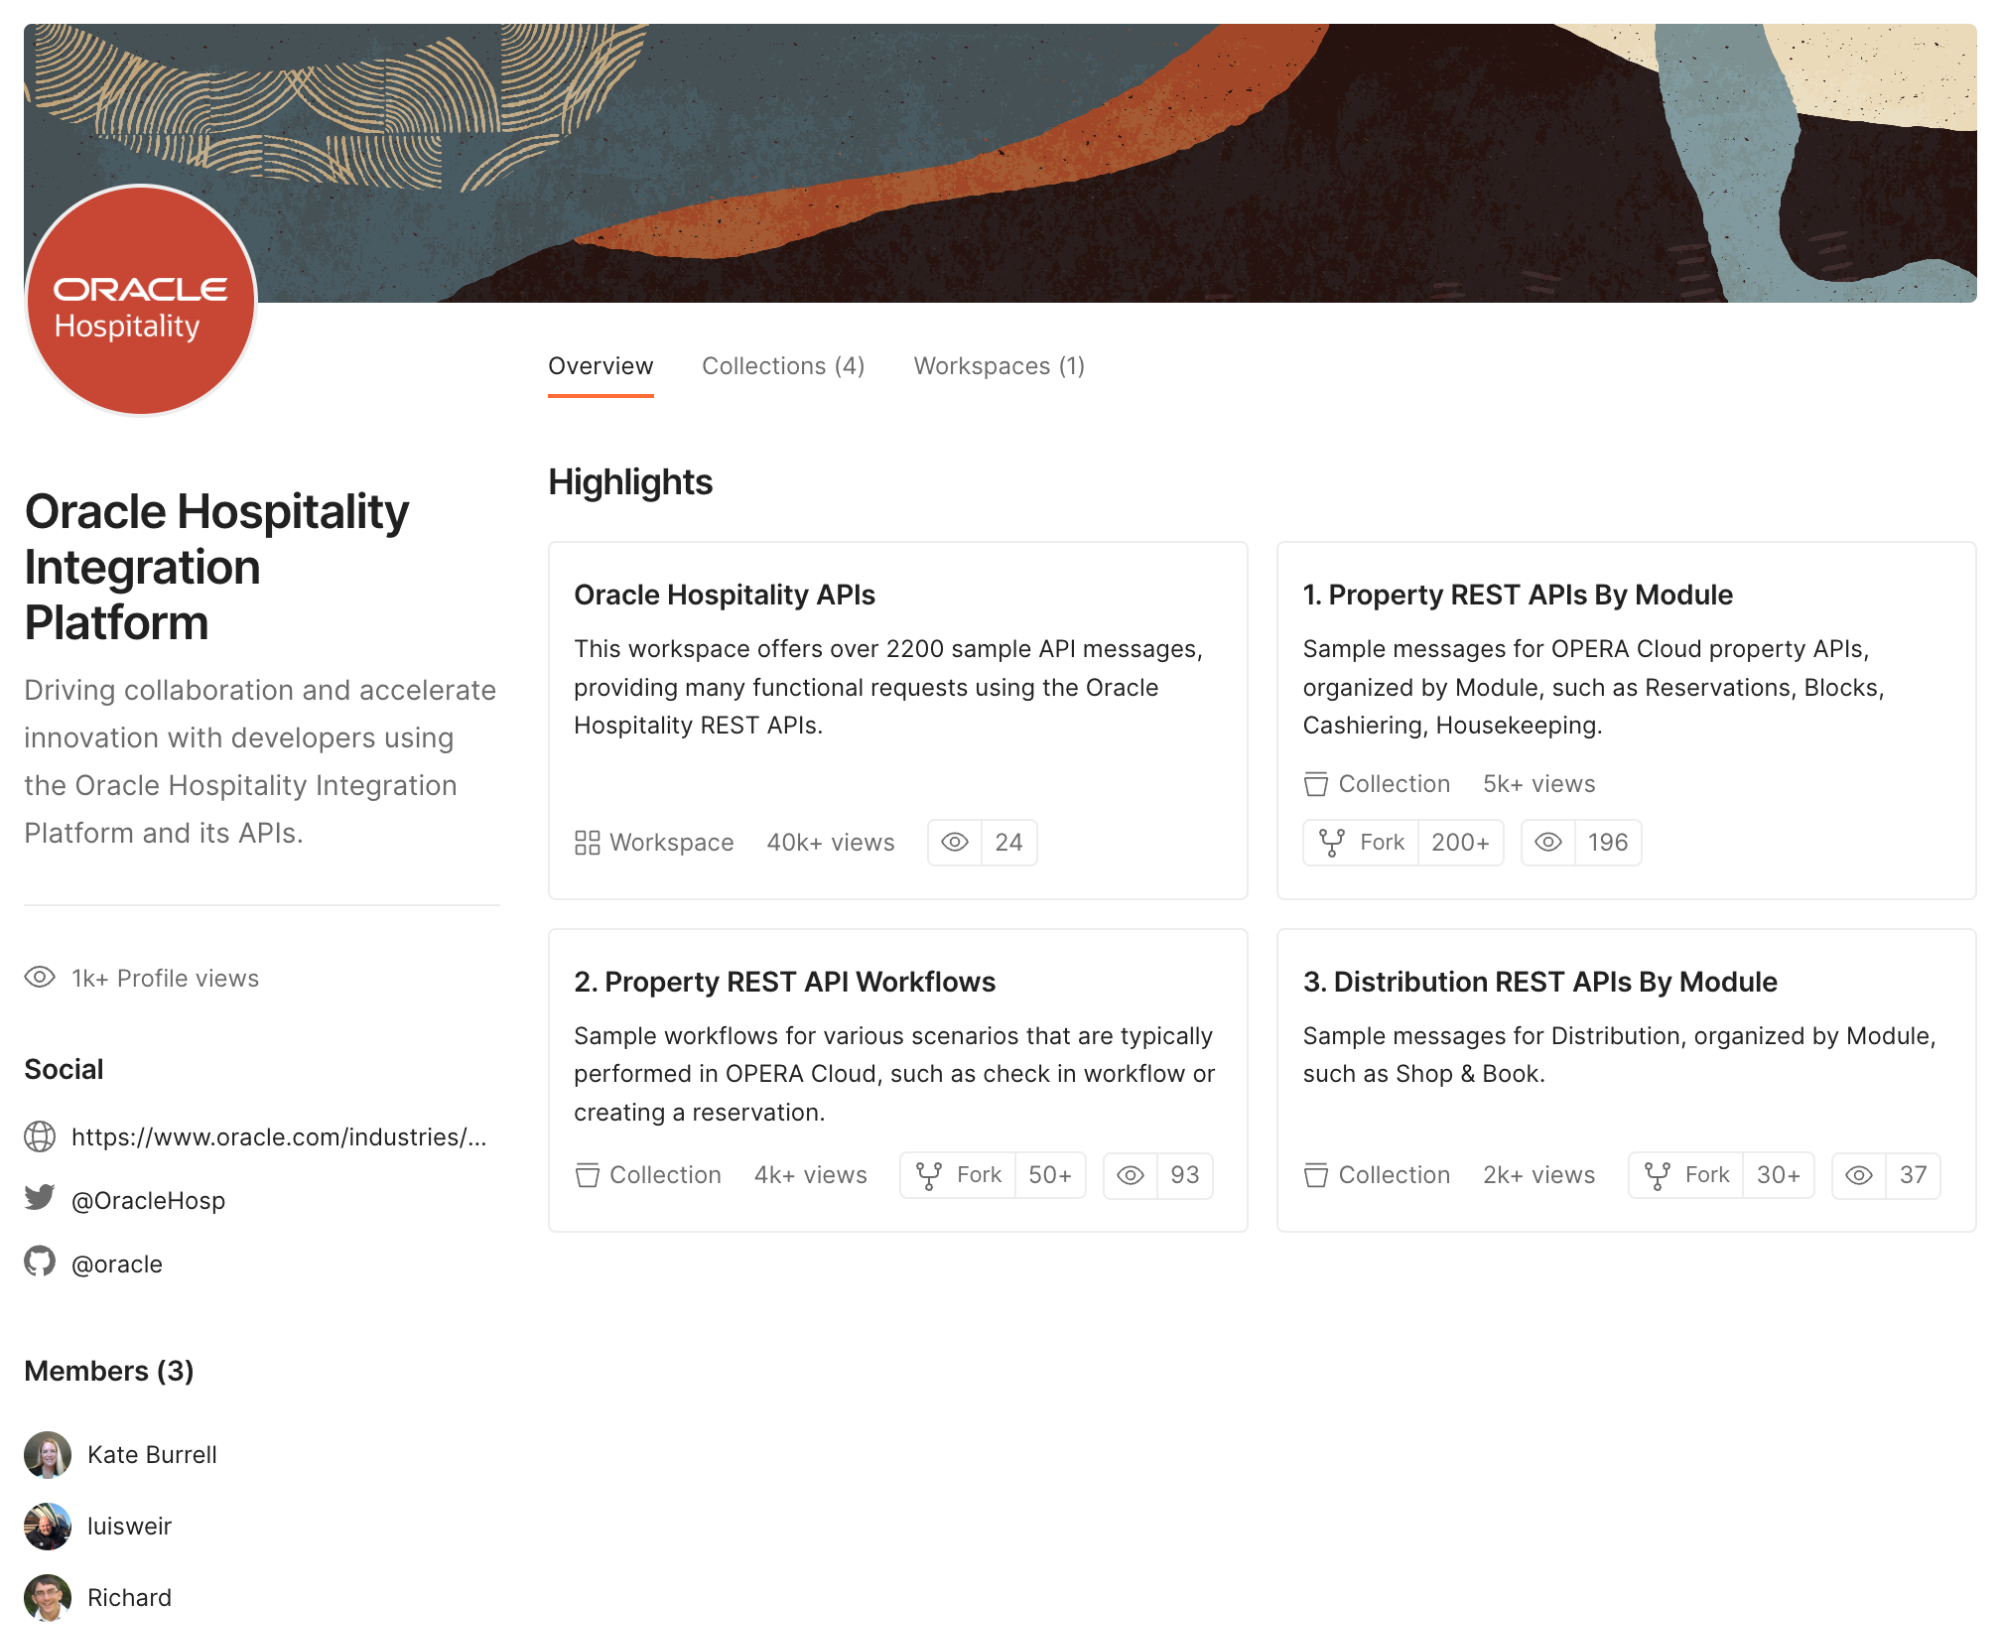 Oracle has a separate team profile for their hospitality software platform